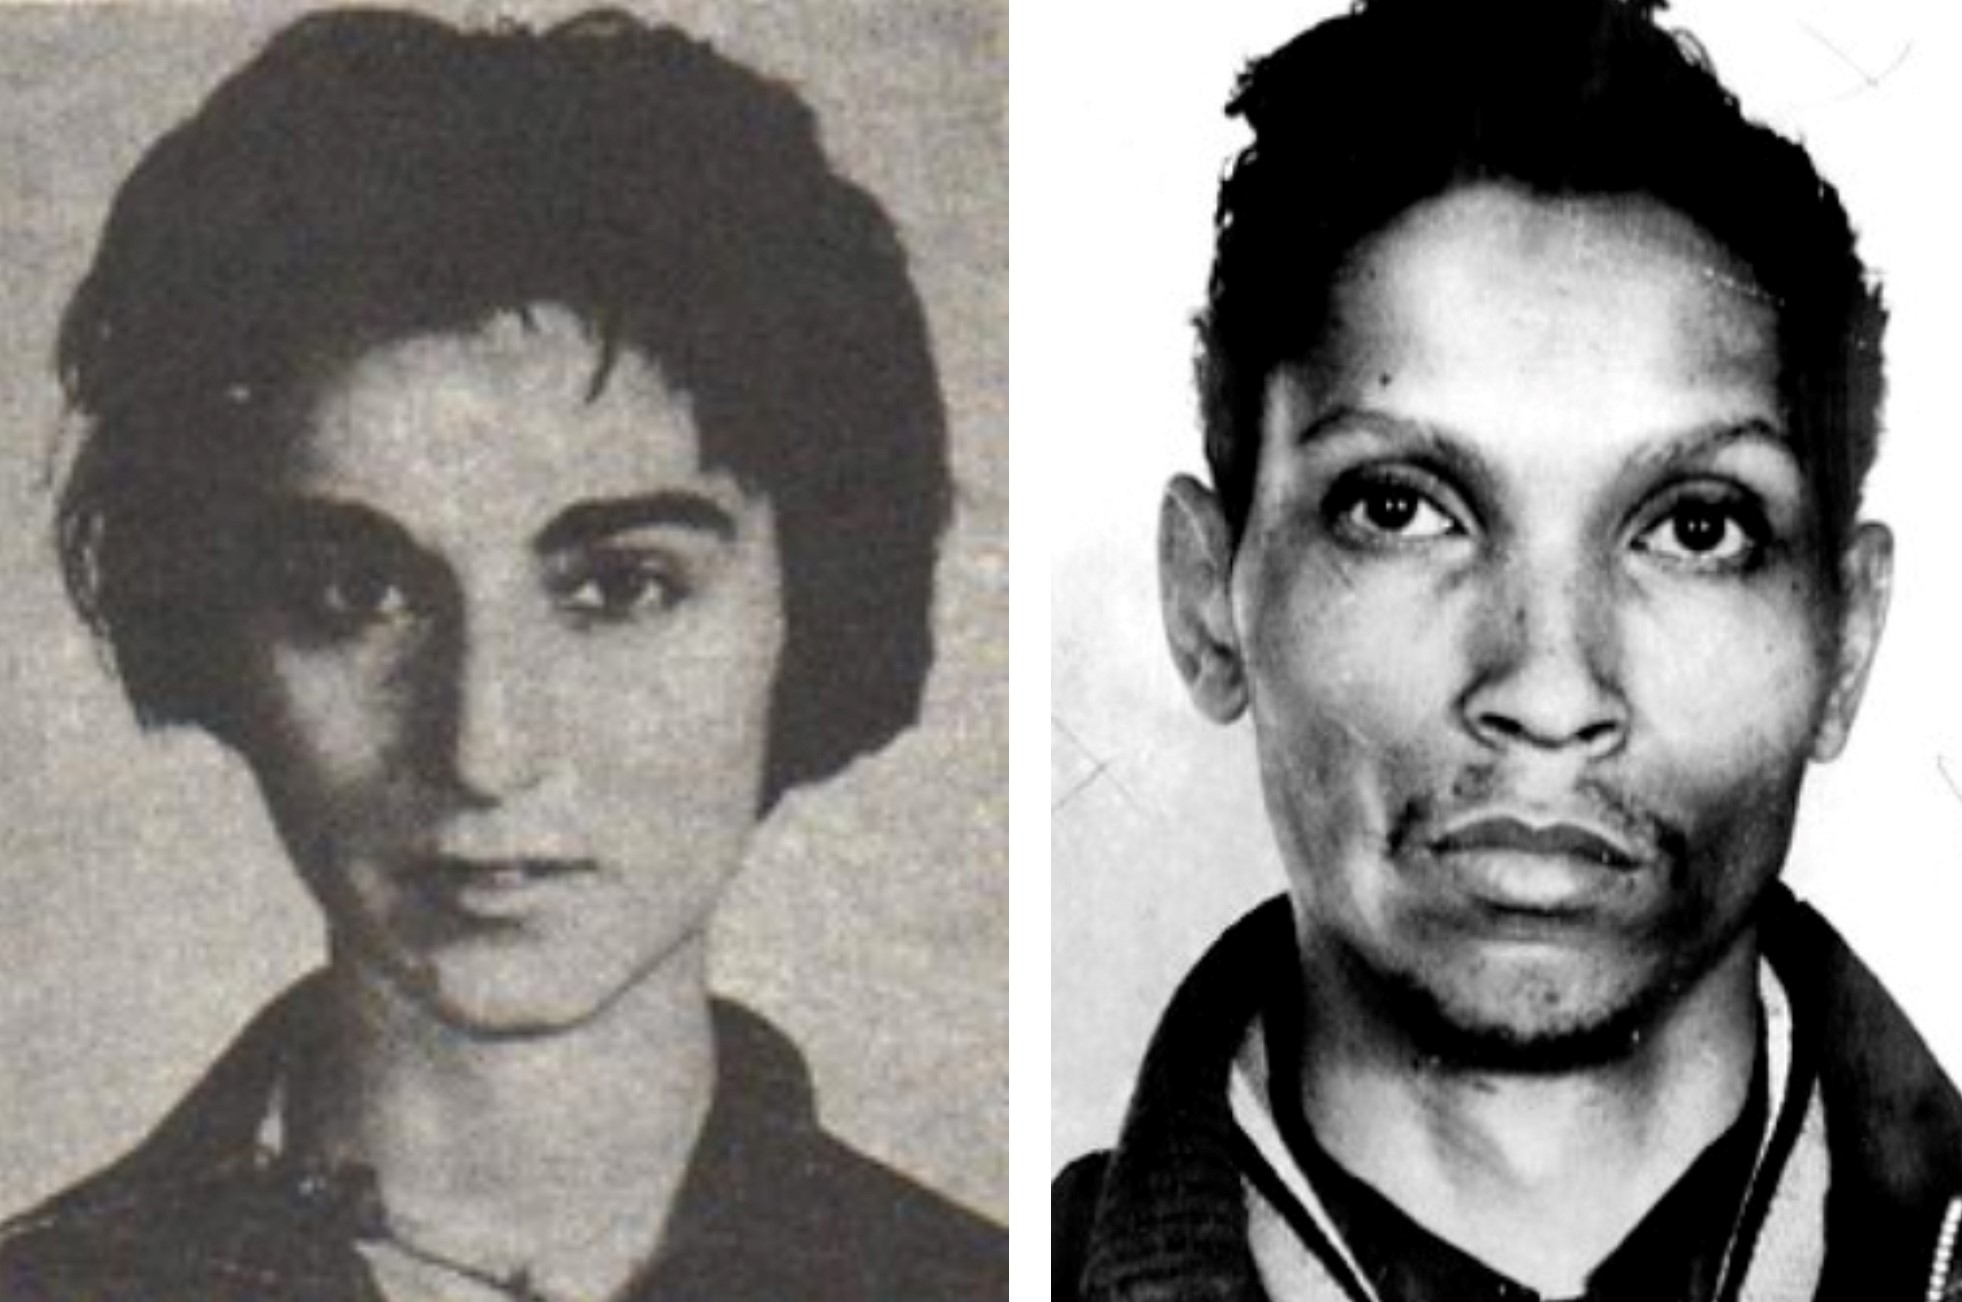 On the left, Kitty Genovese. On the right, Winston Moseley.